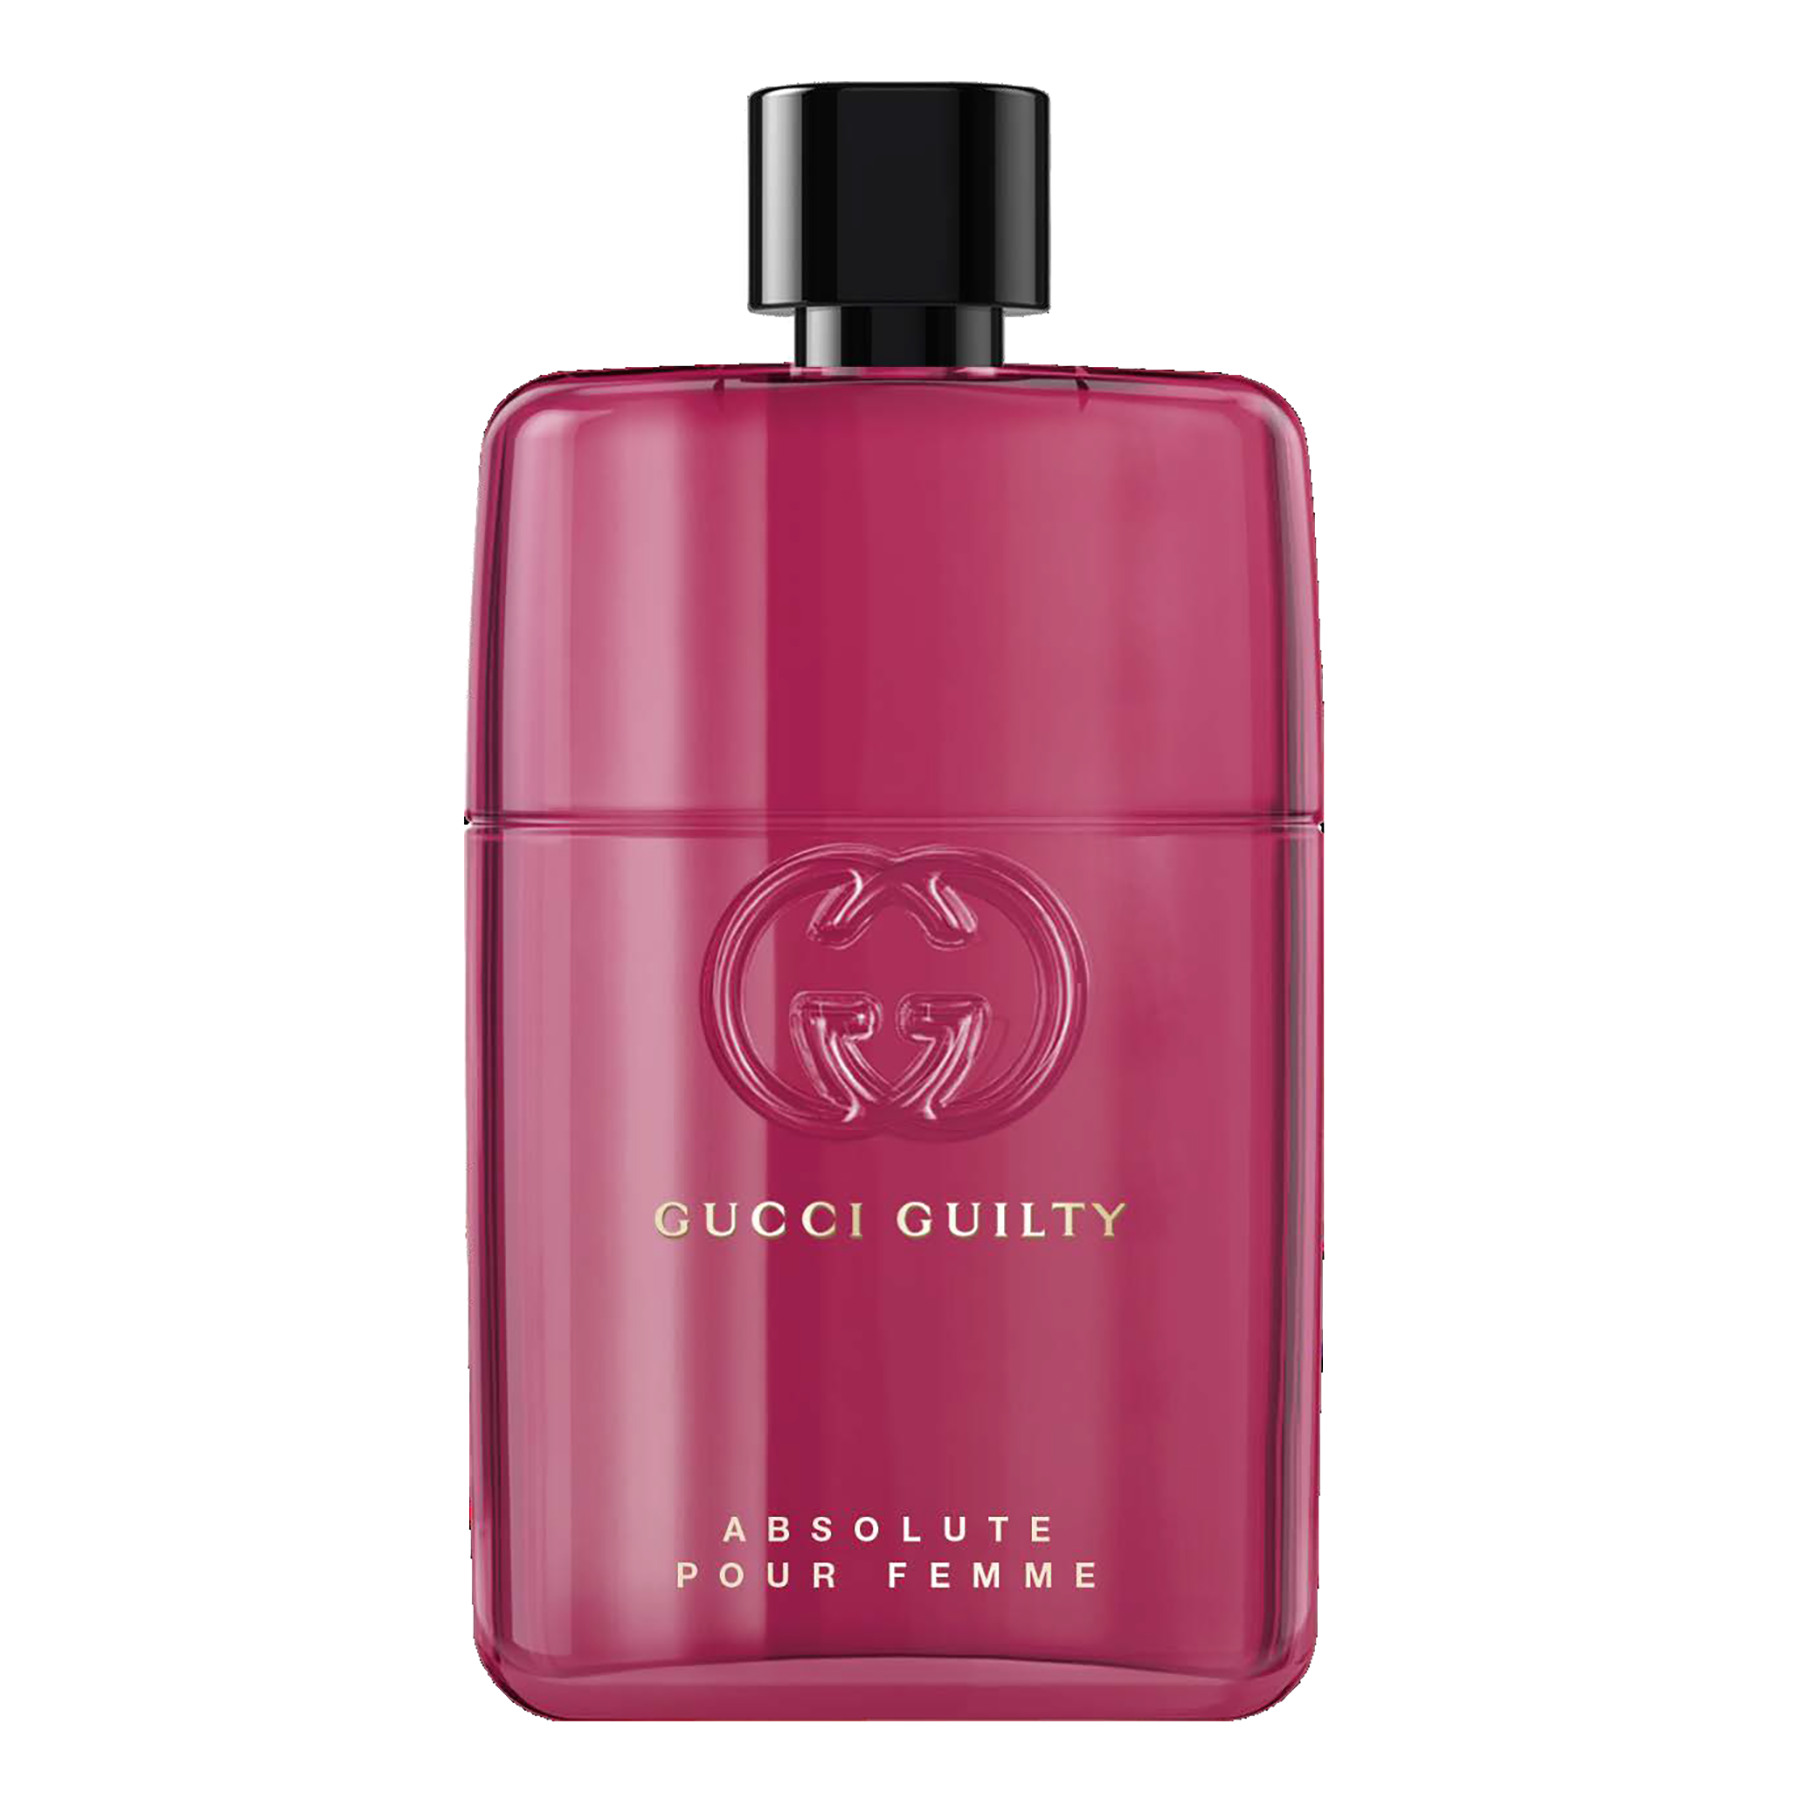 Gucci guilty absolute pour. Gucci guilty absolute pour femme. Gucci guilty absolute pour femme EDP 50ml. Gucci guilty absolute pour femme 90. Gucci guilty absolute pour femme,90 мл.